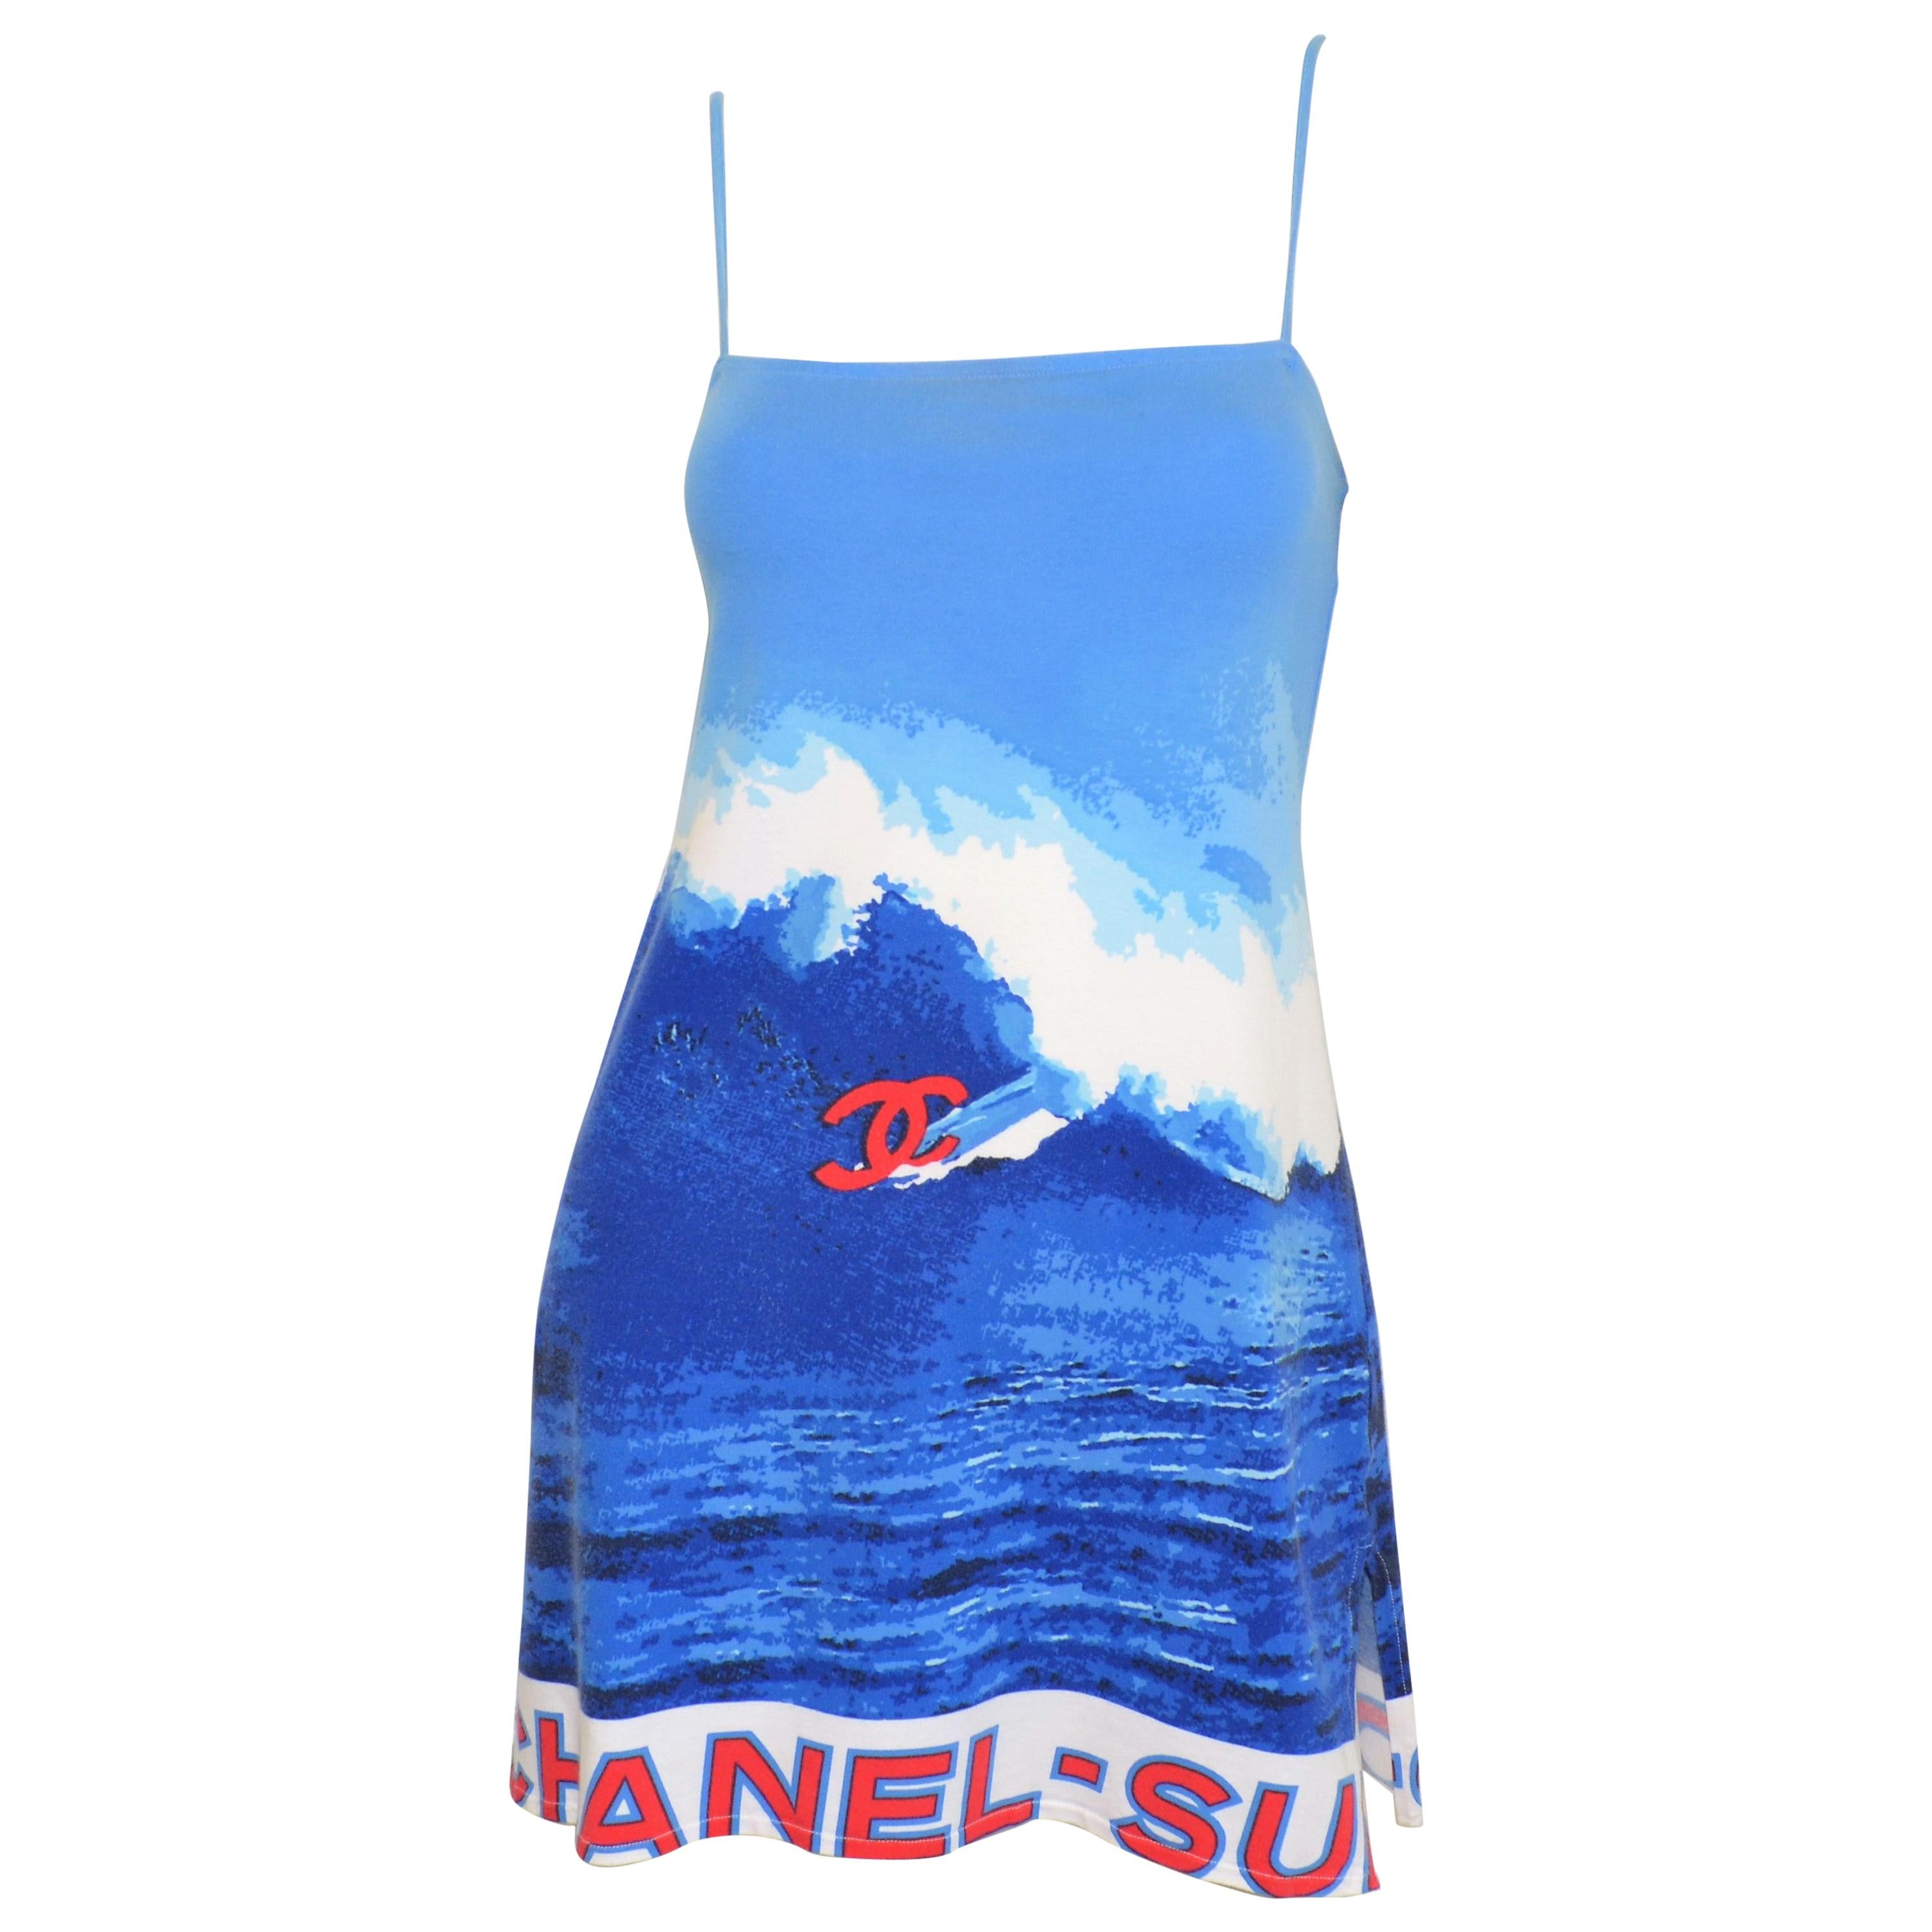 Chanel 2002 Summer Collection Surf Print Dress